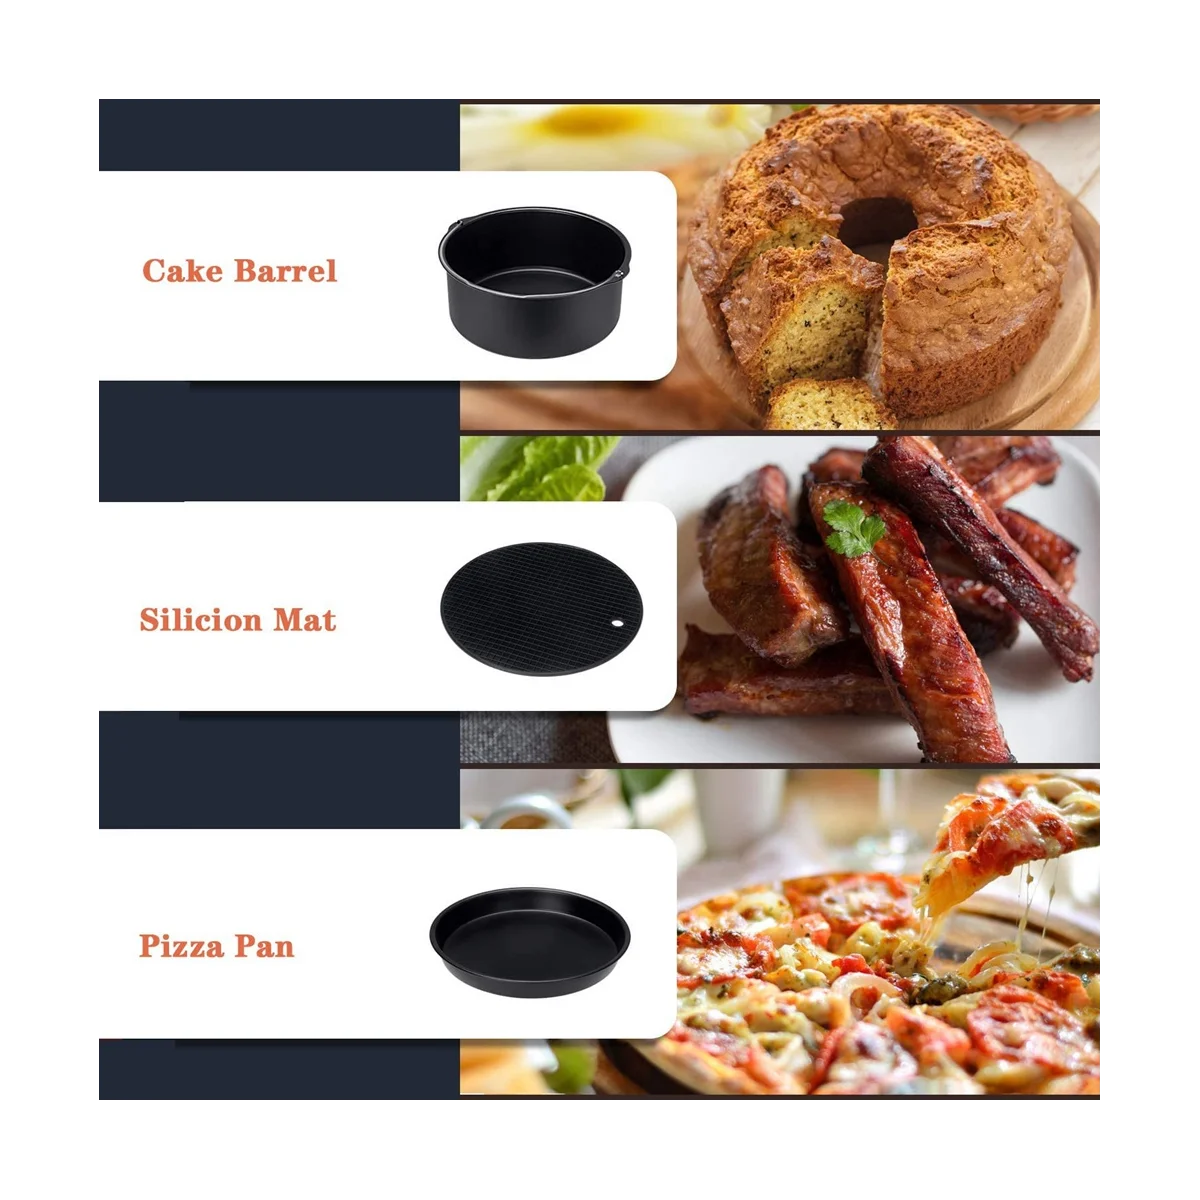 https://ae01.alicdn.com/kf/Sca4ddf15d6de48b38e1180a59d915bffM/Fit-3-5QT-5-8Qt-7-Inch-Air-Fryer-Accessories-8-Pcs-Kits-with-Skewers-Silicone.jpg